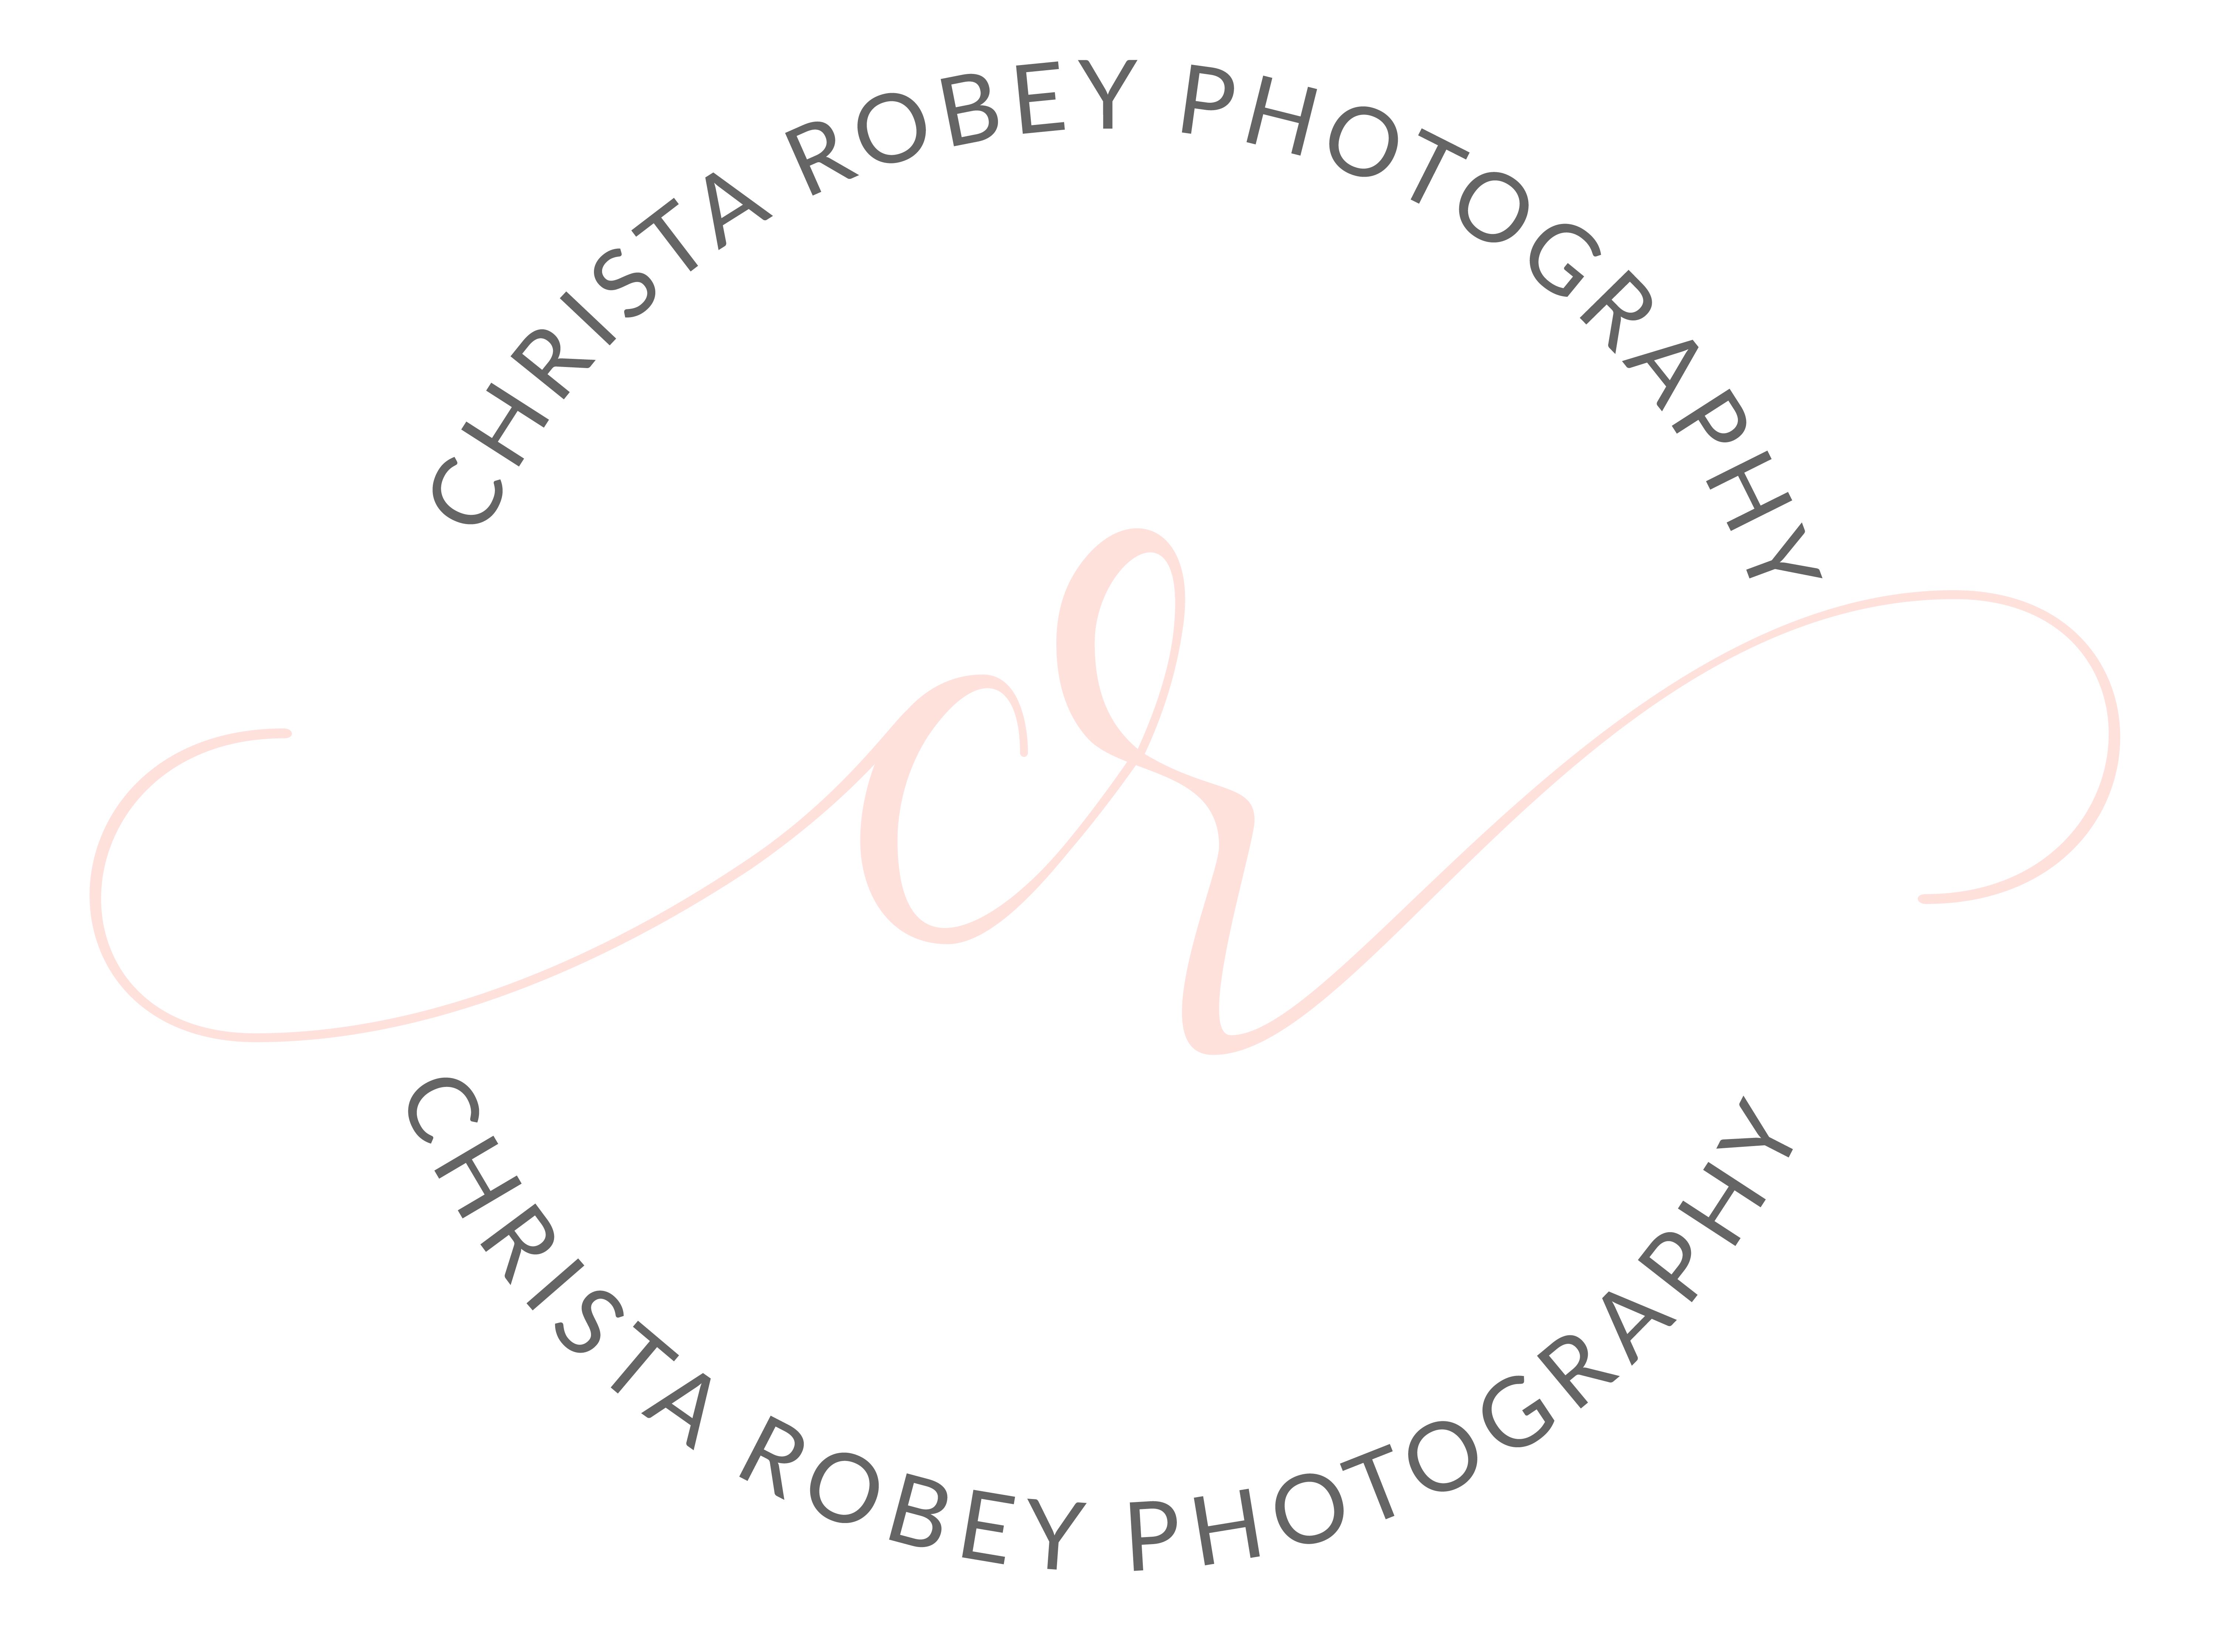 Christa Robey Photography | Wedding Photographers - The Knot